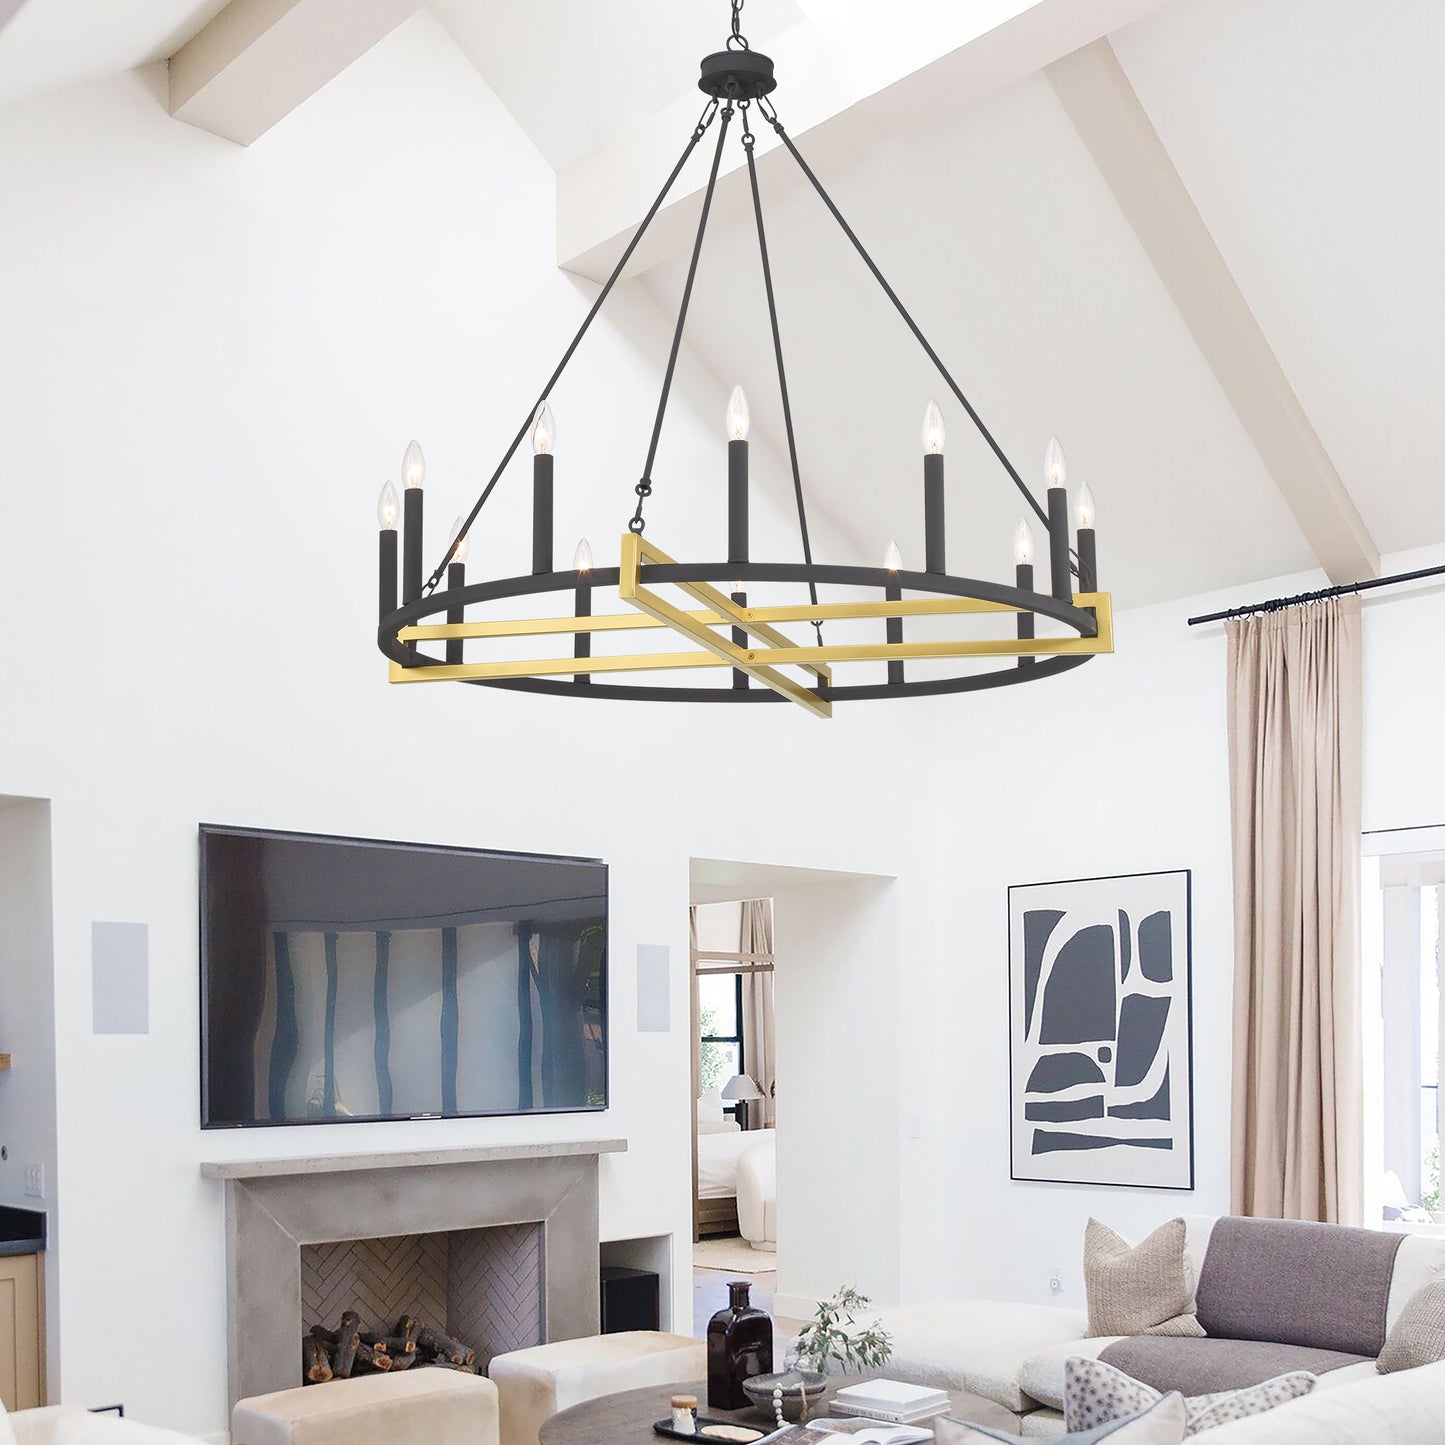 Windsor 12-Light Unique Candle Style Wagon Wheel Chandelier UL Listed